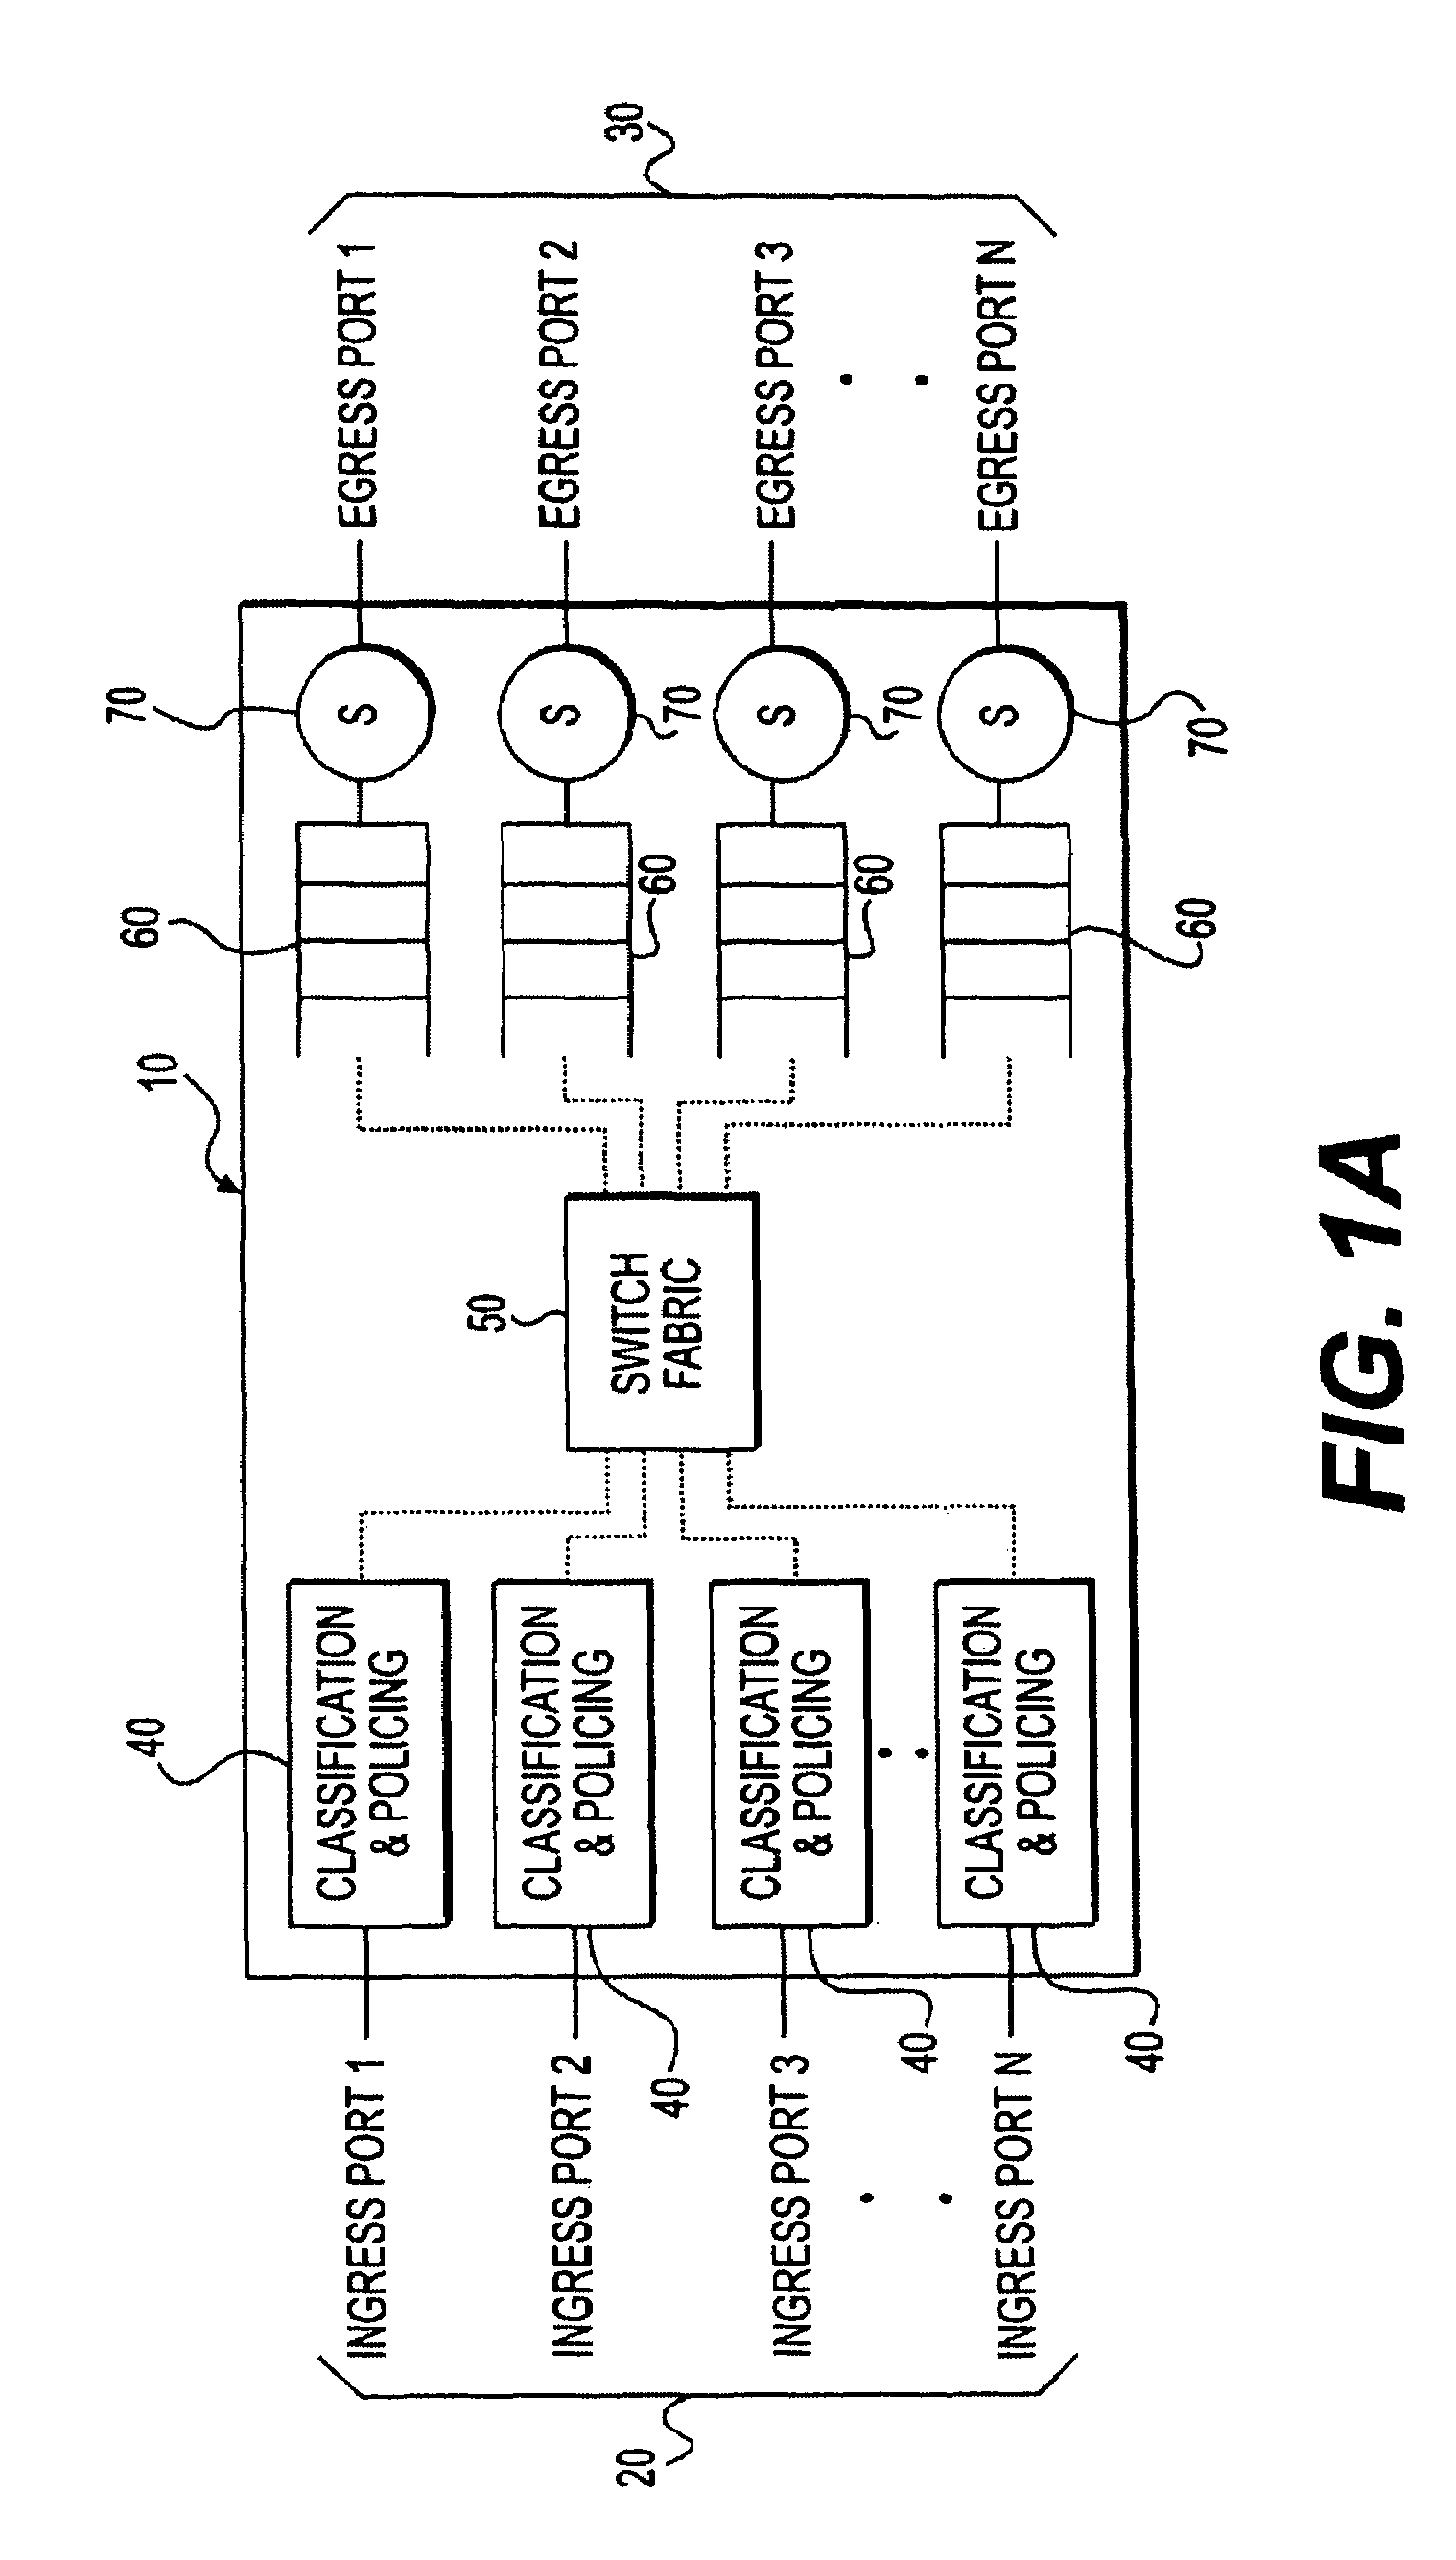 Method and apparatus for improving performance in a network using a virtual queue and a switched poisson process traffic model